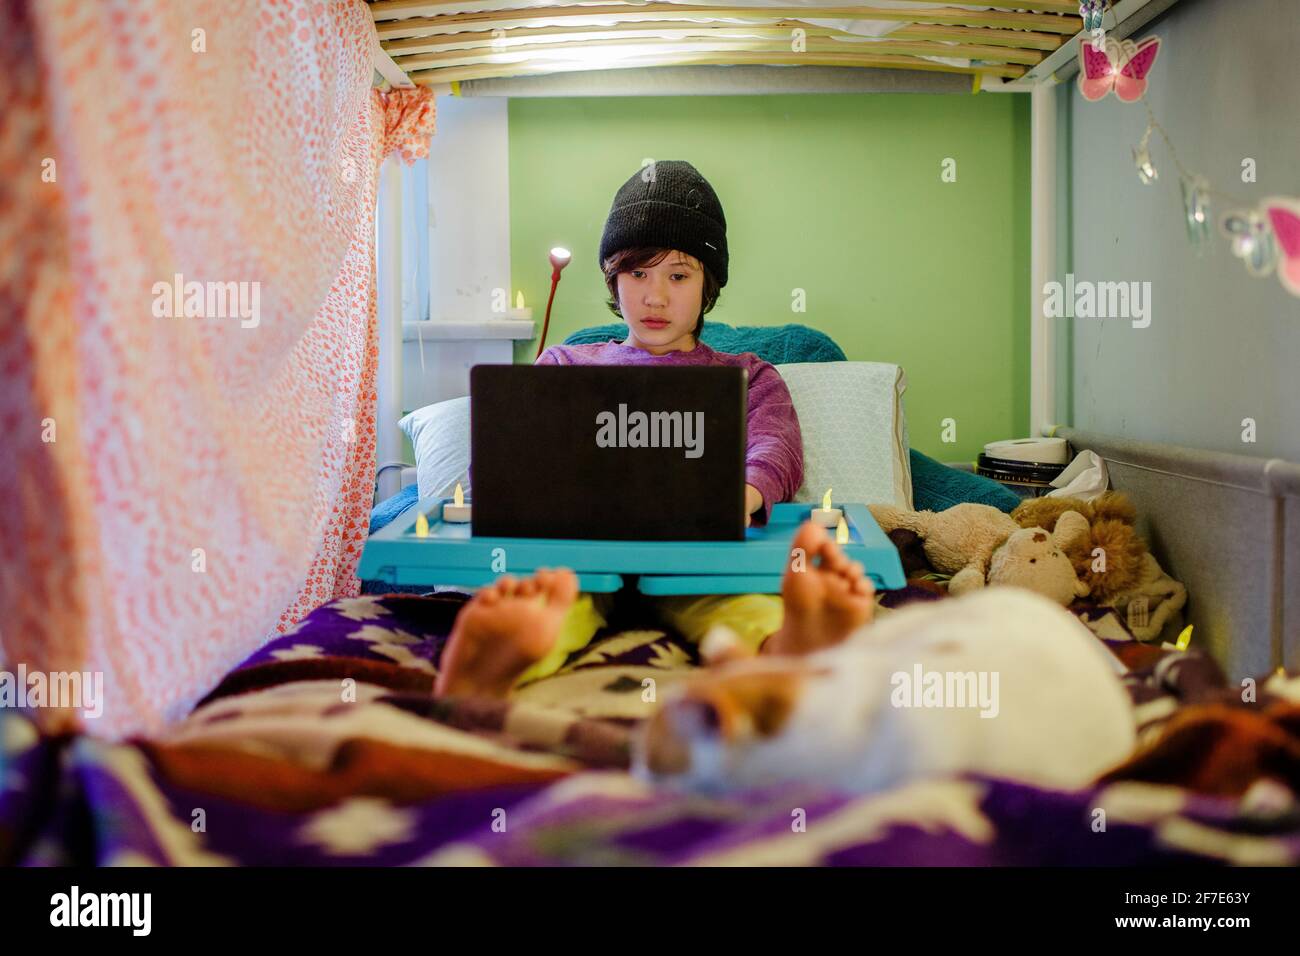 A boy sits in bed with knit hat doing schoolwork on computer with cat Stock Photo